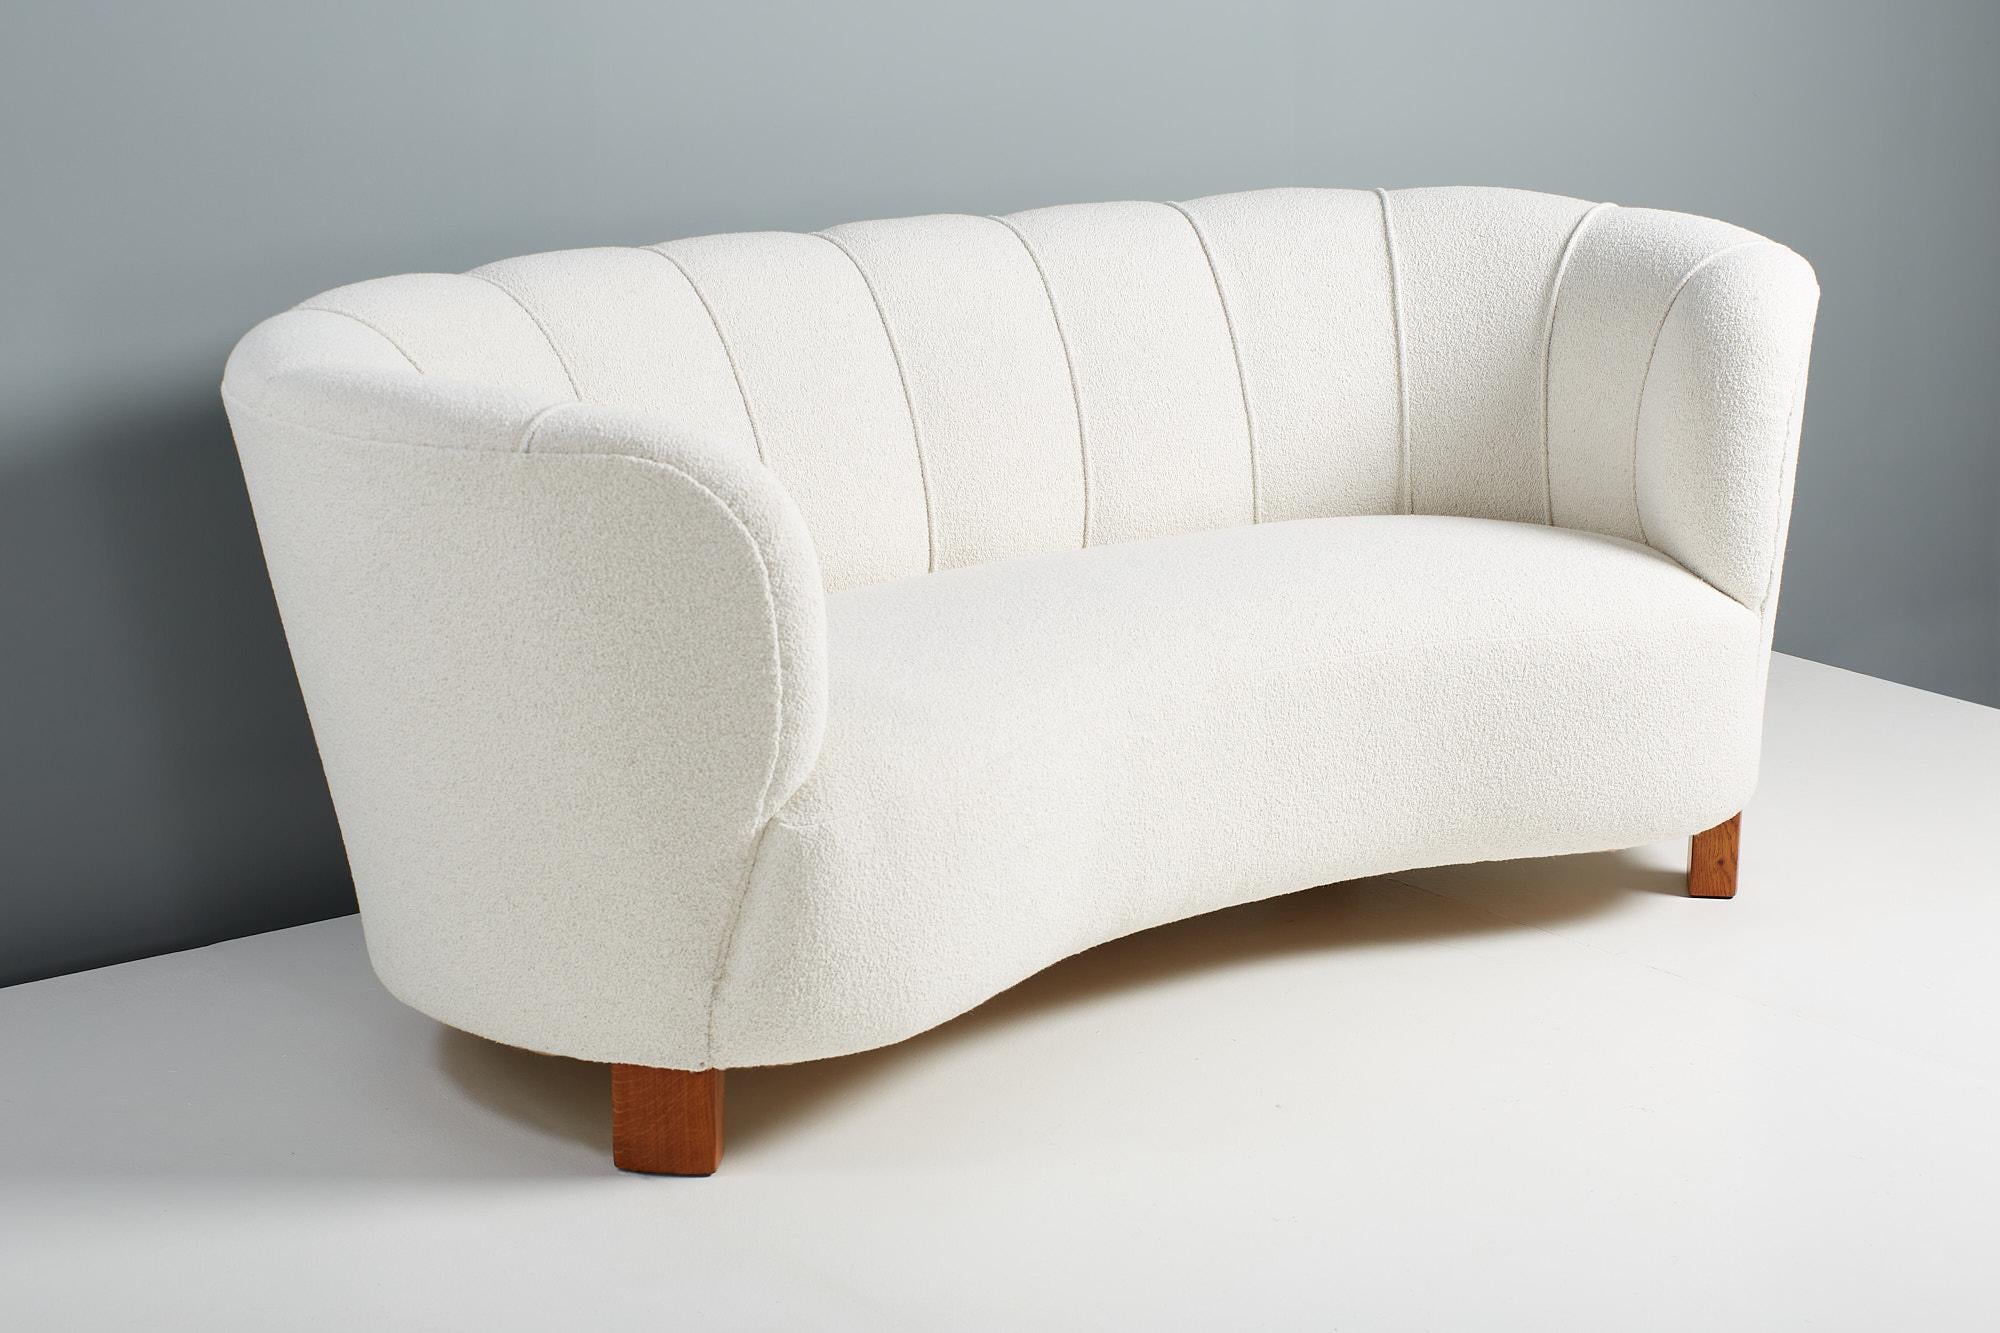 Slagelse Mobelvaerk - Curved Sofa, 1950s

Rarely seen curved sofa from Danish cabinetmakers Slagelse Mobelvaerk. The sofa has been reupholstered in luxurious off-white boucle fabric with patinated, oiled oak legs.

H: 72cm  /  D: 77cm  /  W: 190cm 